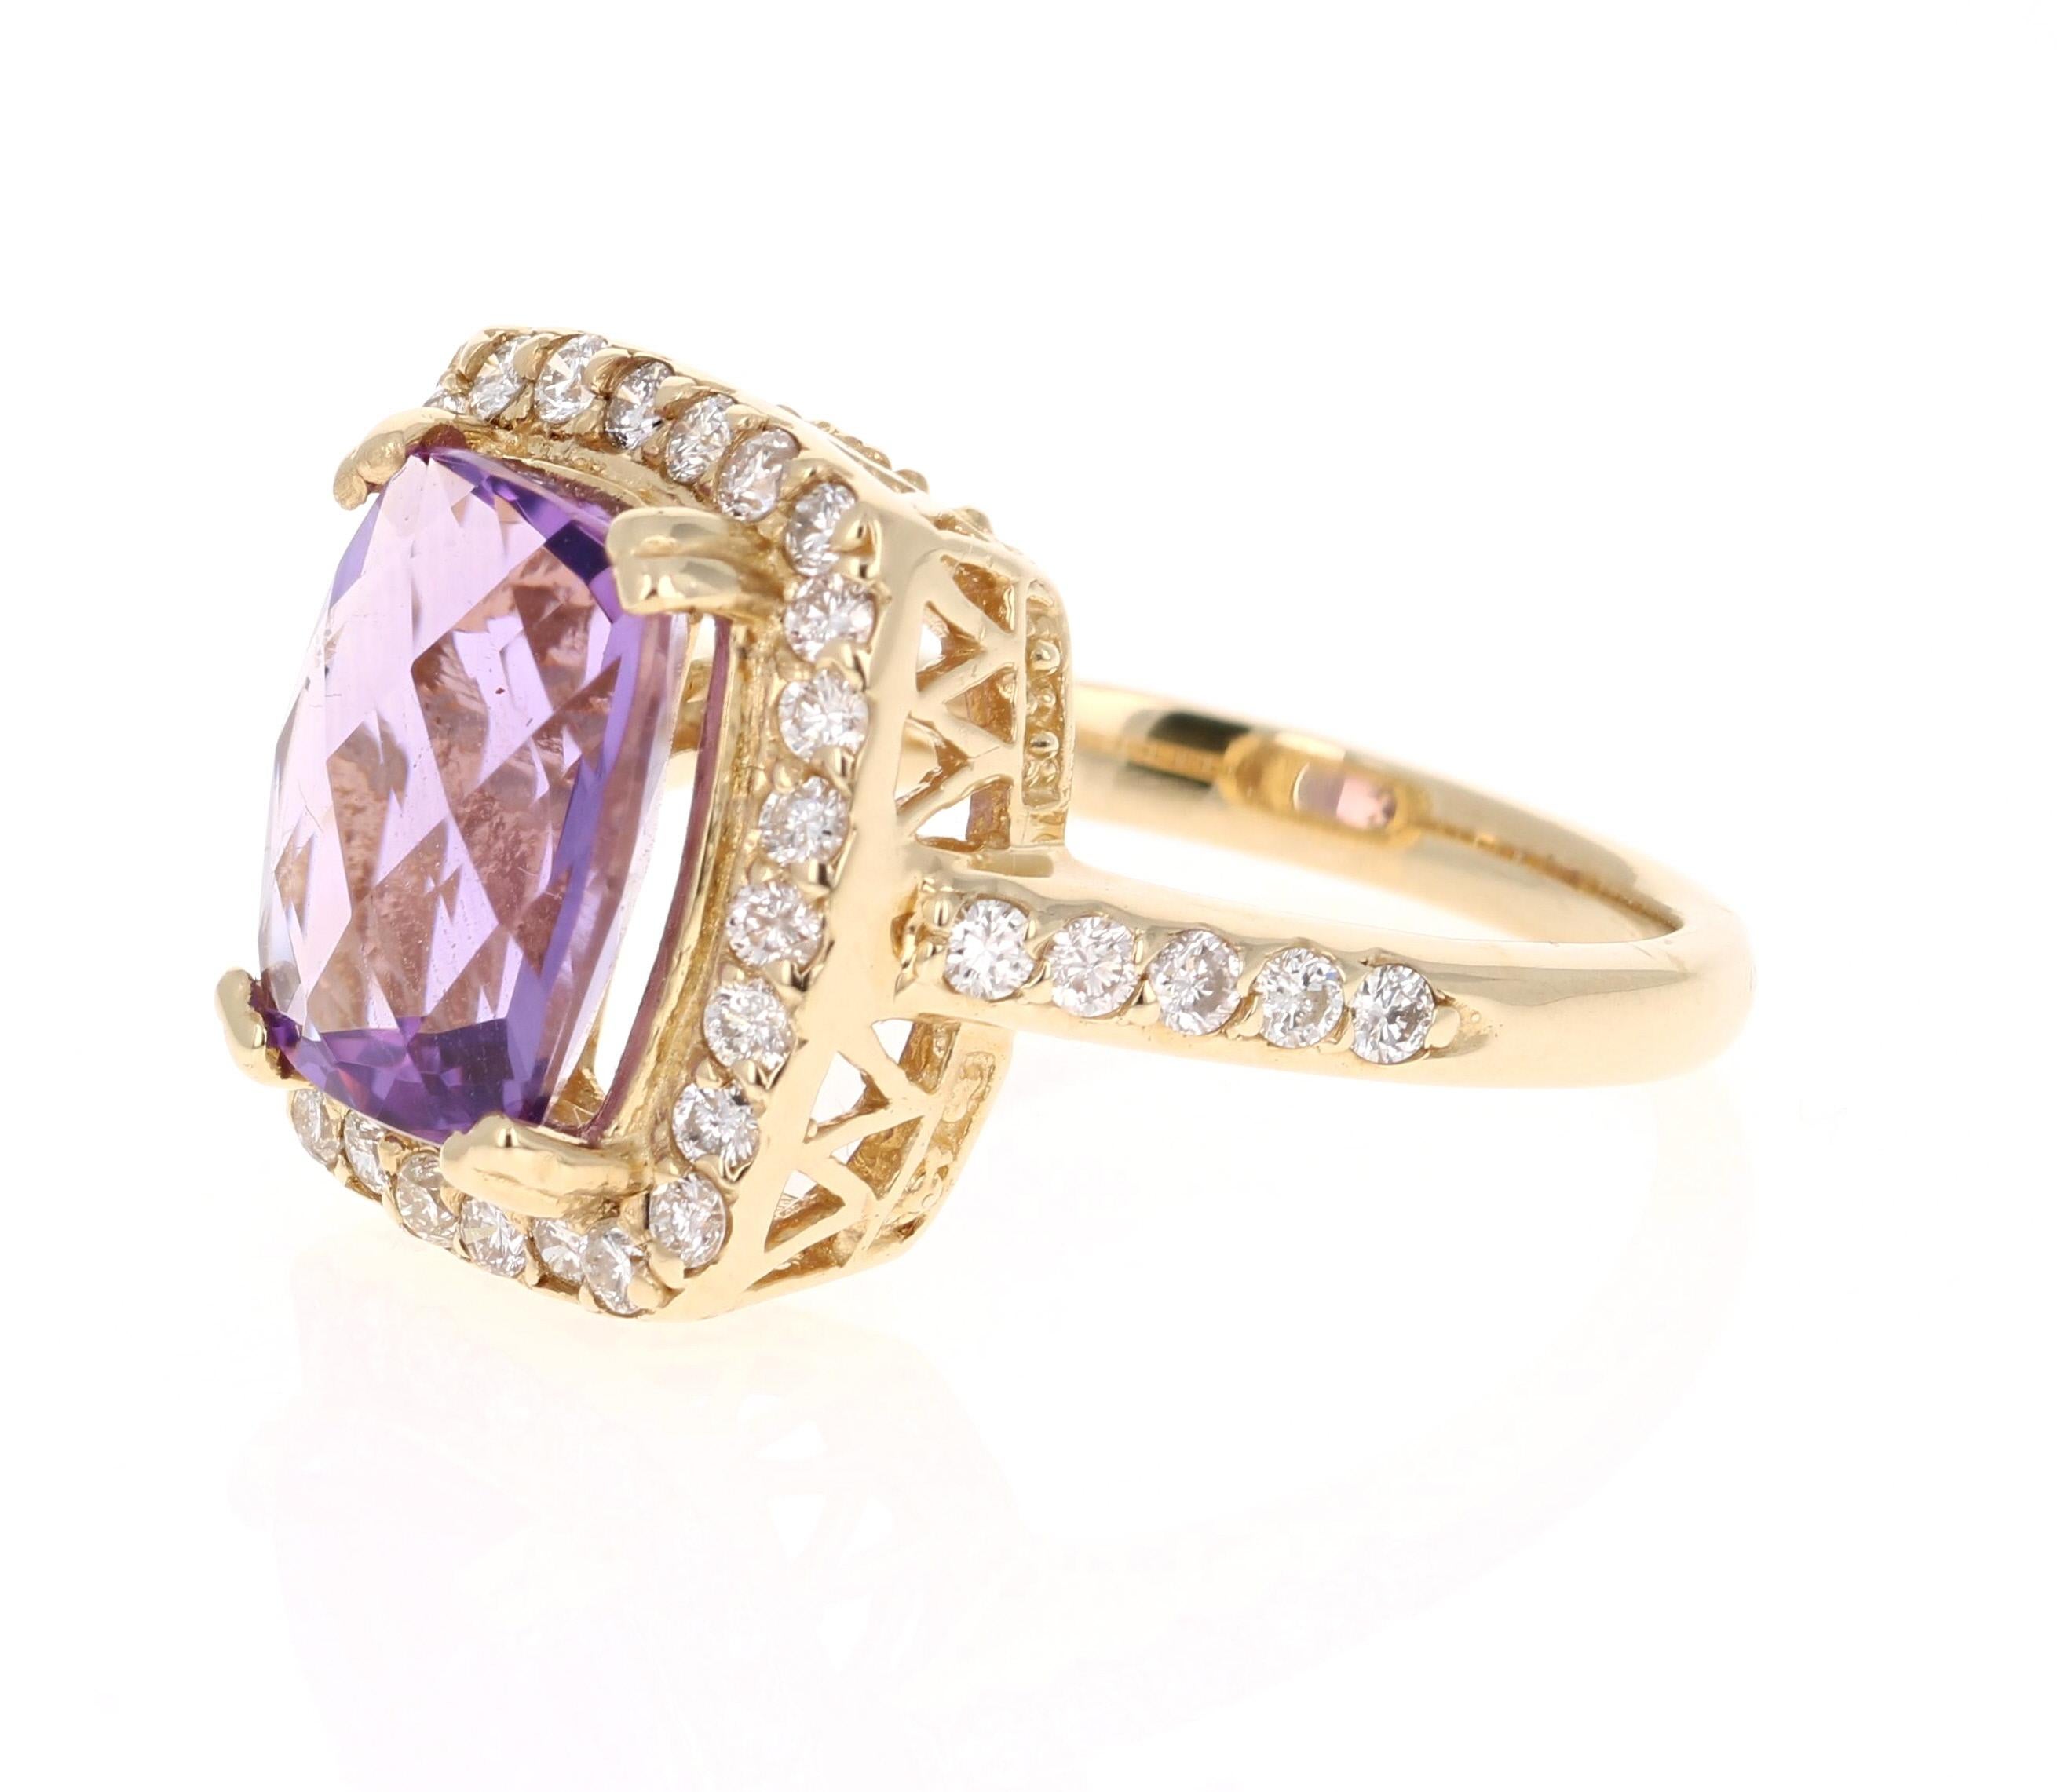 This beautiful ring has a 3.70 Carat Cushion Cut Amethyst and is surrounded by 36 Round Cut Diamonds that weigh 0.67 carats. The total weight of the ring is 4.37 carats. The ring is designed in 14K Yellow Gold and weighs approximately 6.1 grams. It